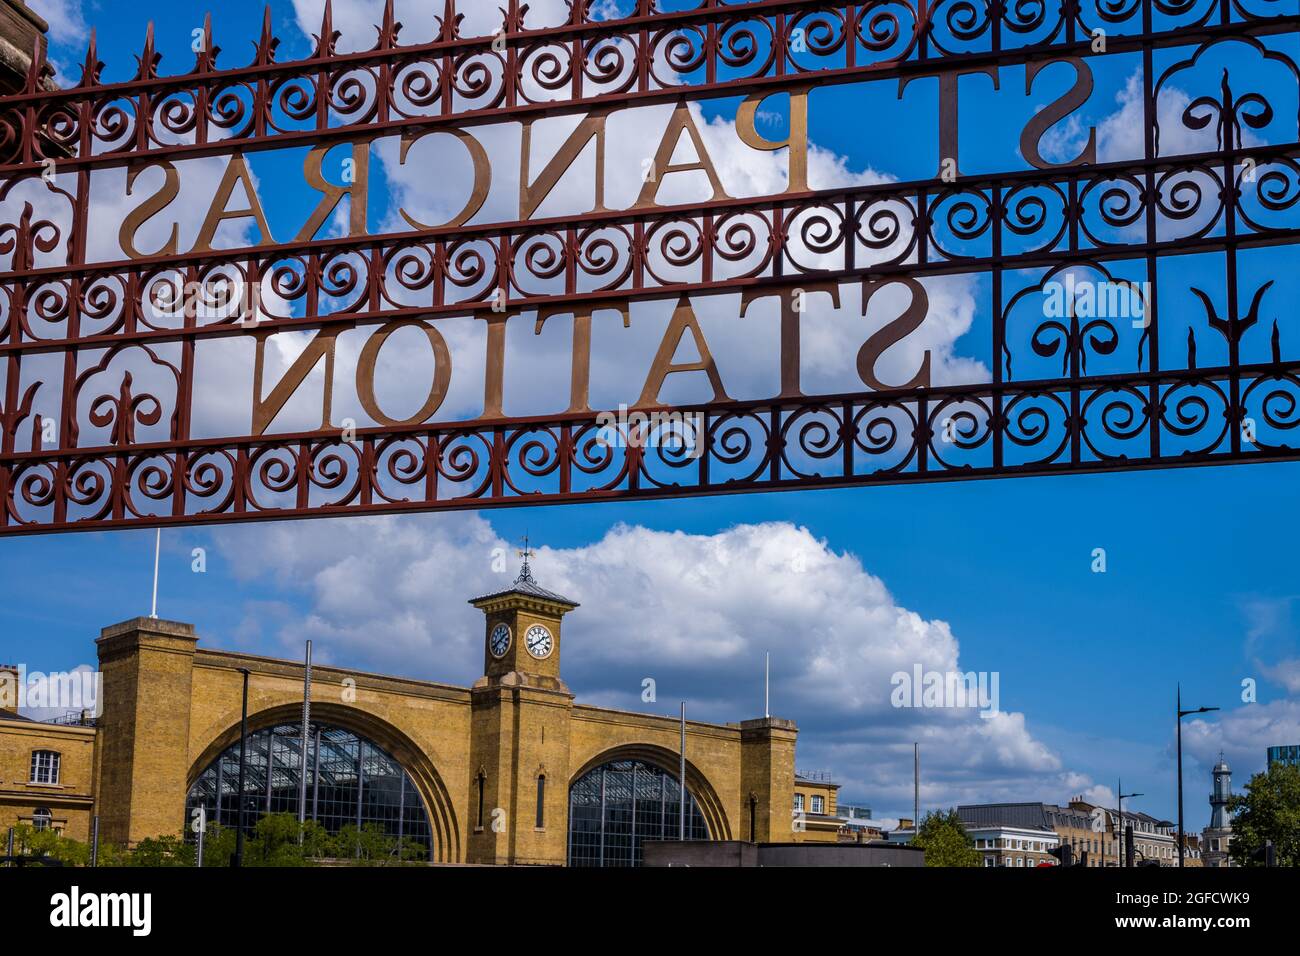 London St Pancras Station Sign with Kings Cross in the background. Kings Cross St. Pancras Stations London. Stock Photo